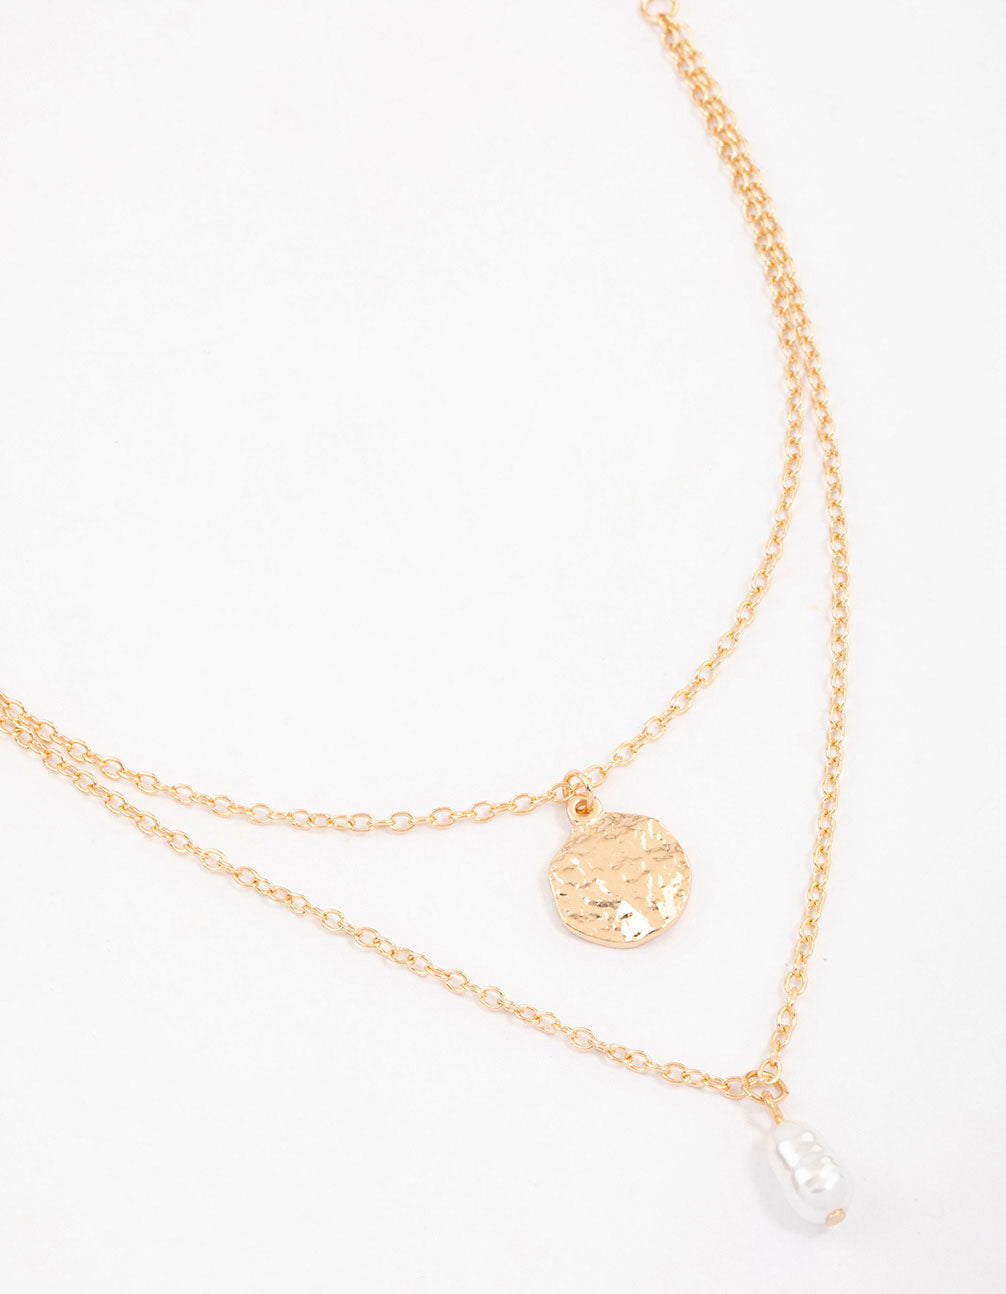 Ready Layered Gold Coin necklace https://www.etsy.com/uk/listing/665855093/ layered-gold-coin-neck… | Silver coin necklace, Gold coin necklace, Gold  necklace layered